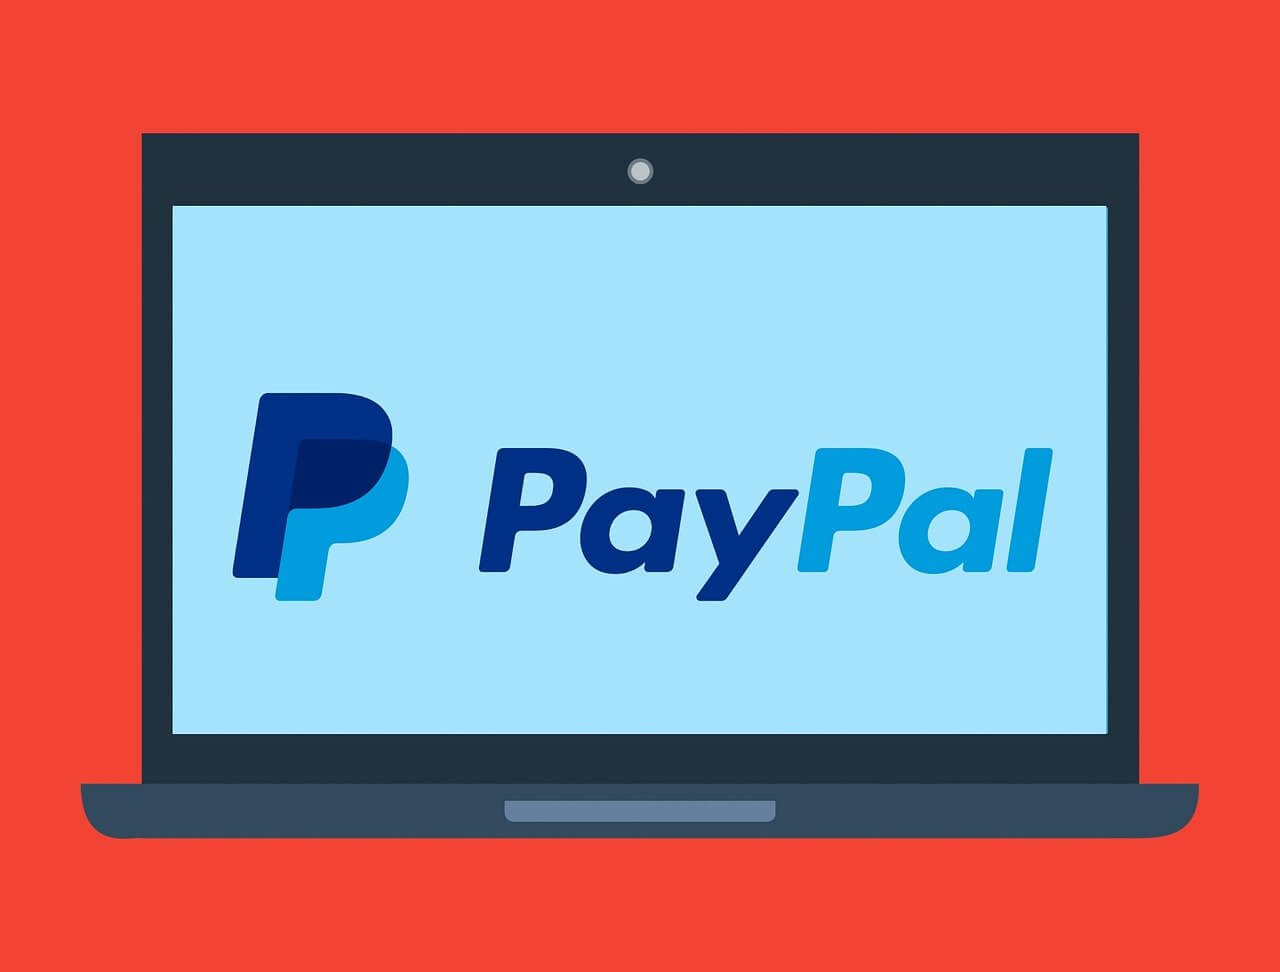 PayPal made some changes to your legal agreements – let’s learn what!